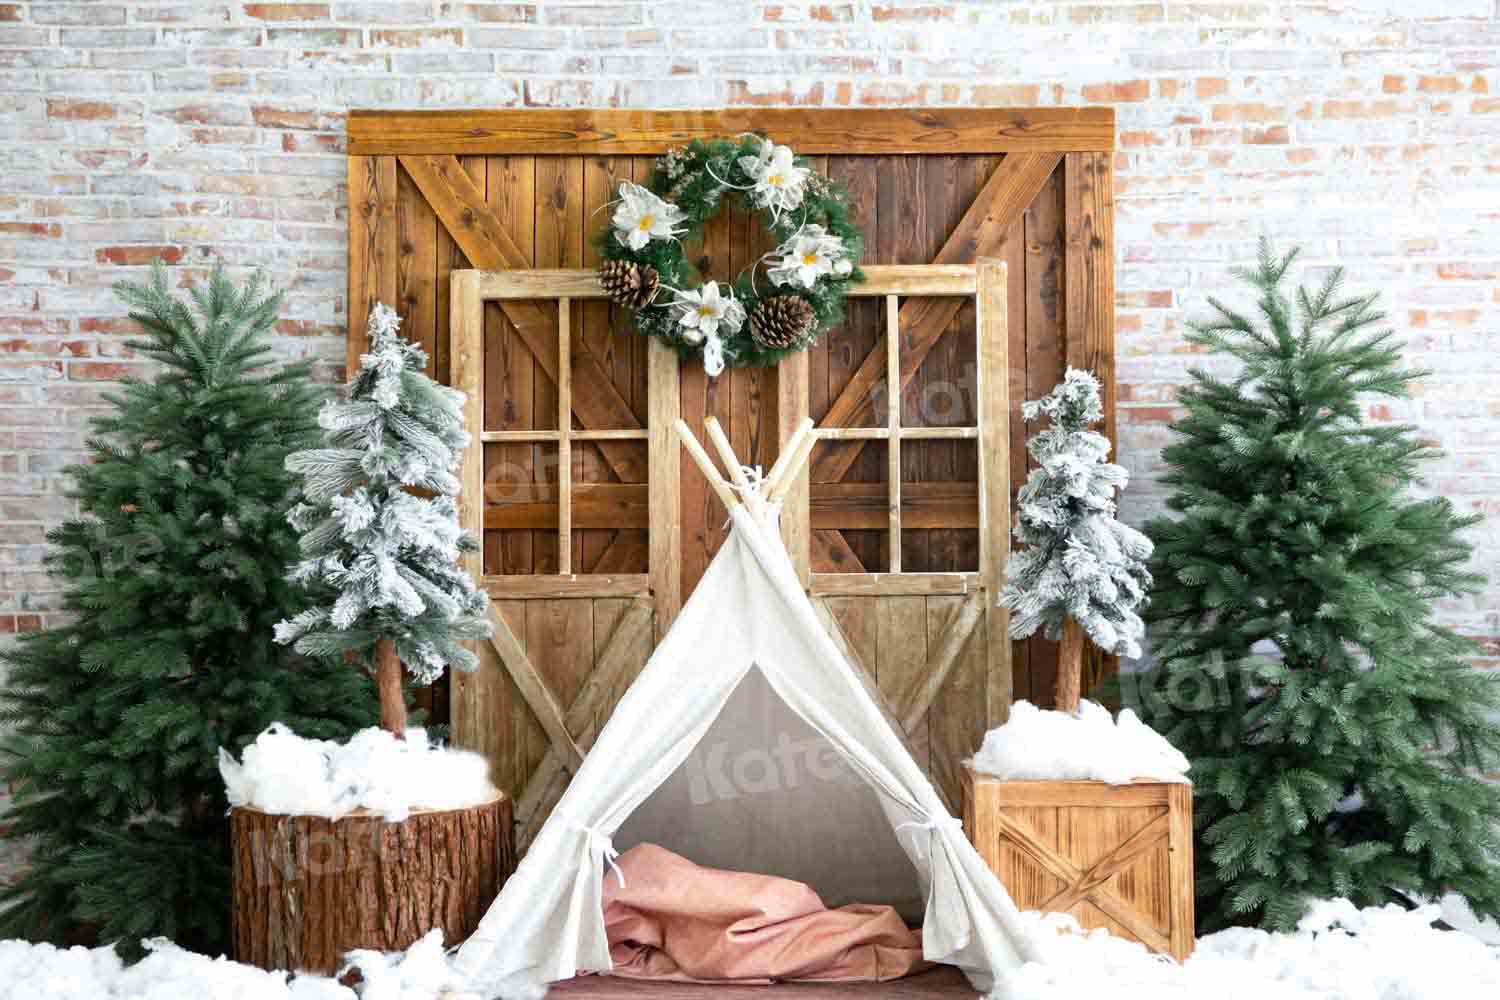 Kate Christmas Snow Backdrop Winter Tent Designed by Emetselch